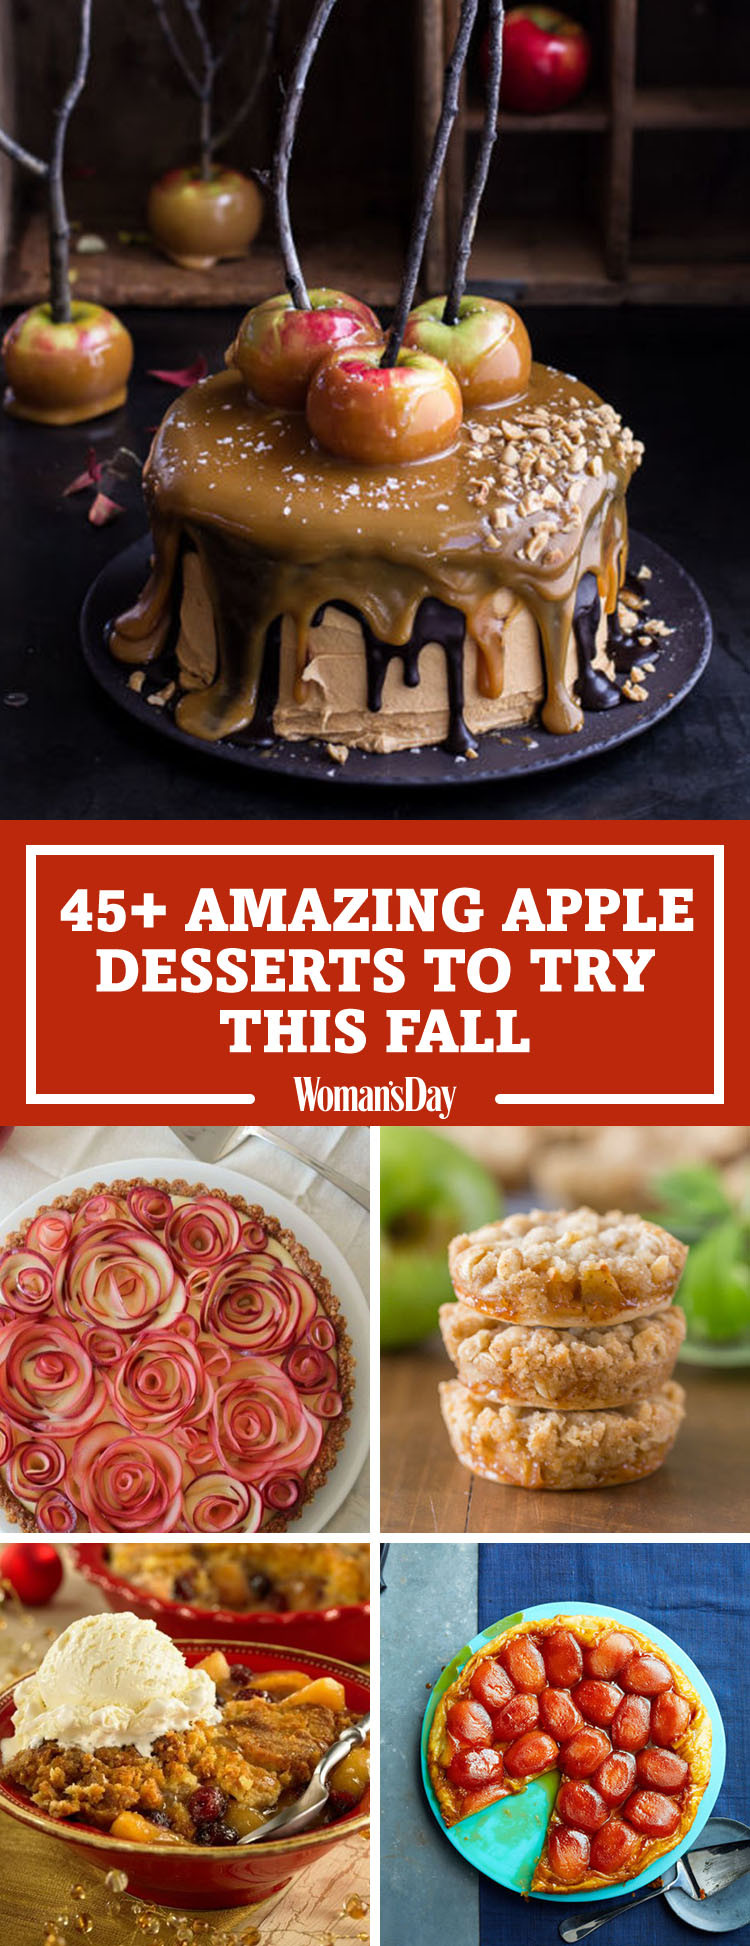 Apple Recipes For Fall
 50 Easy Apple Desserts for Fall Best Recipes for Apple